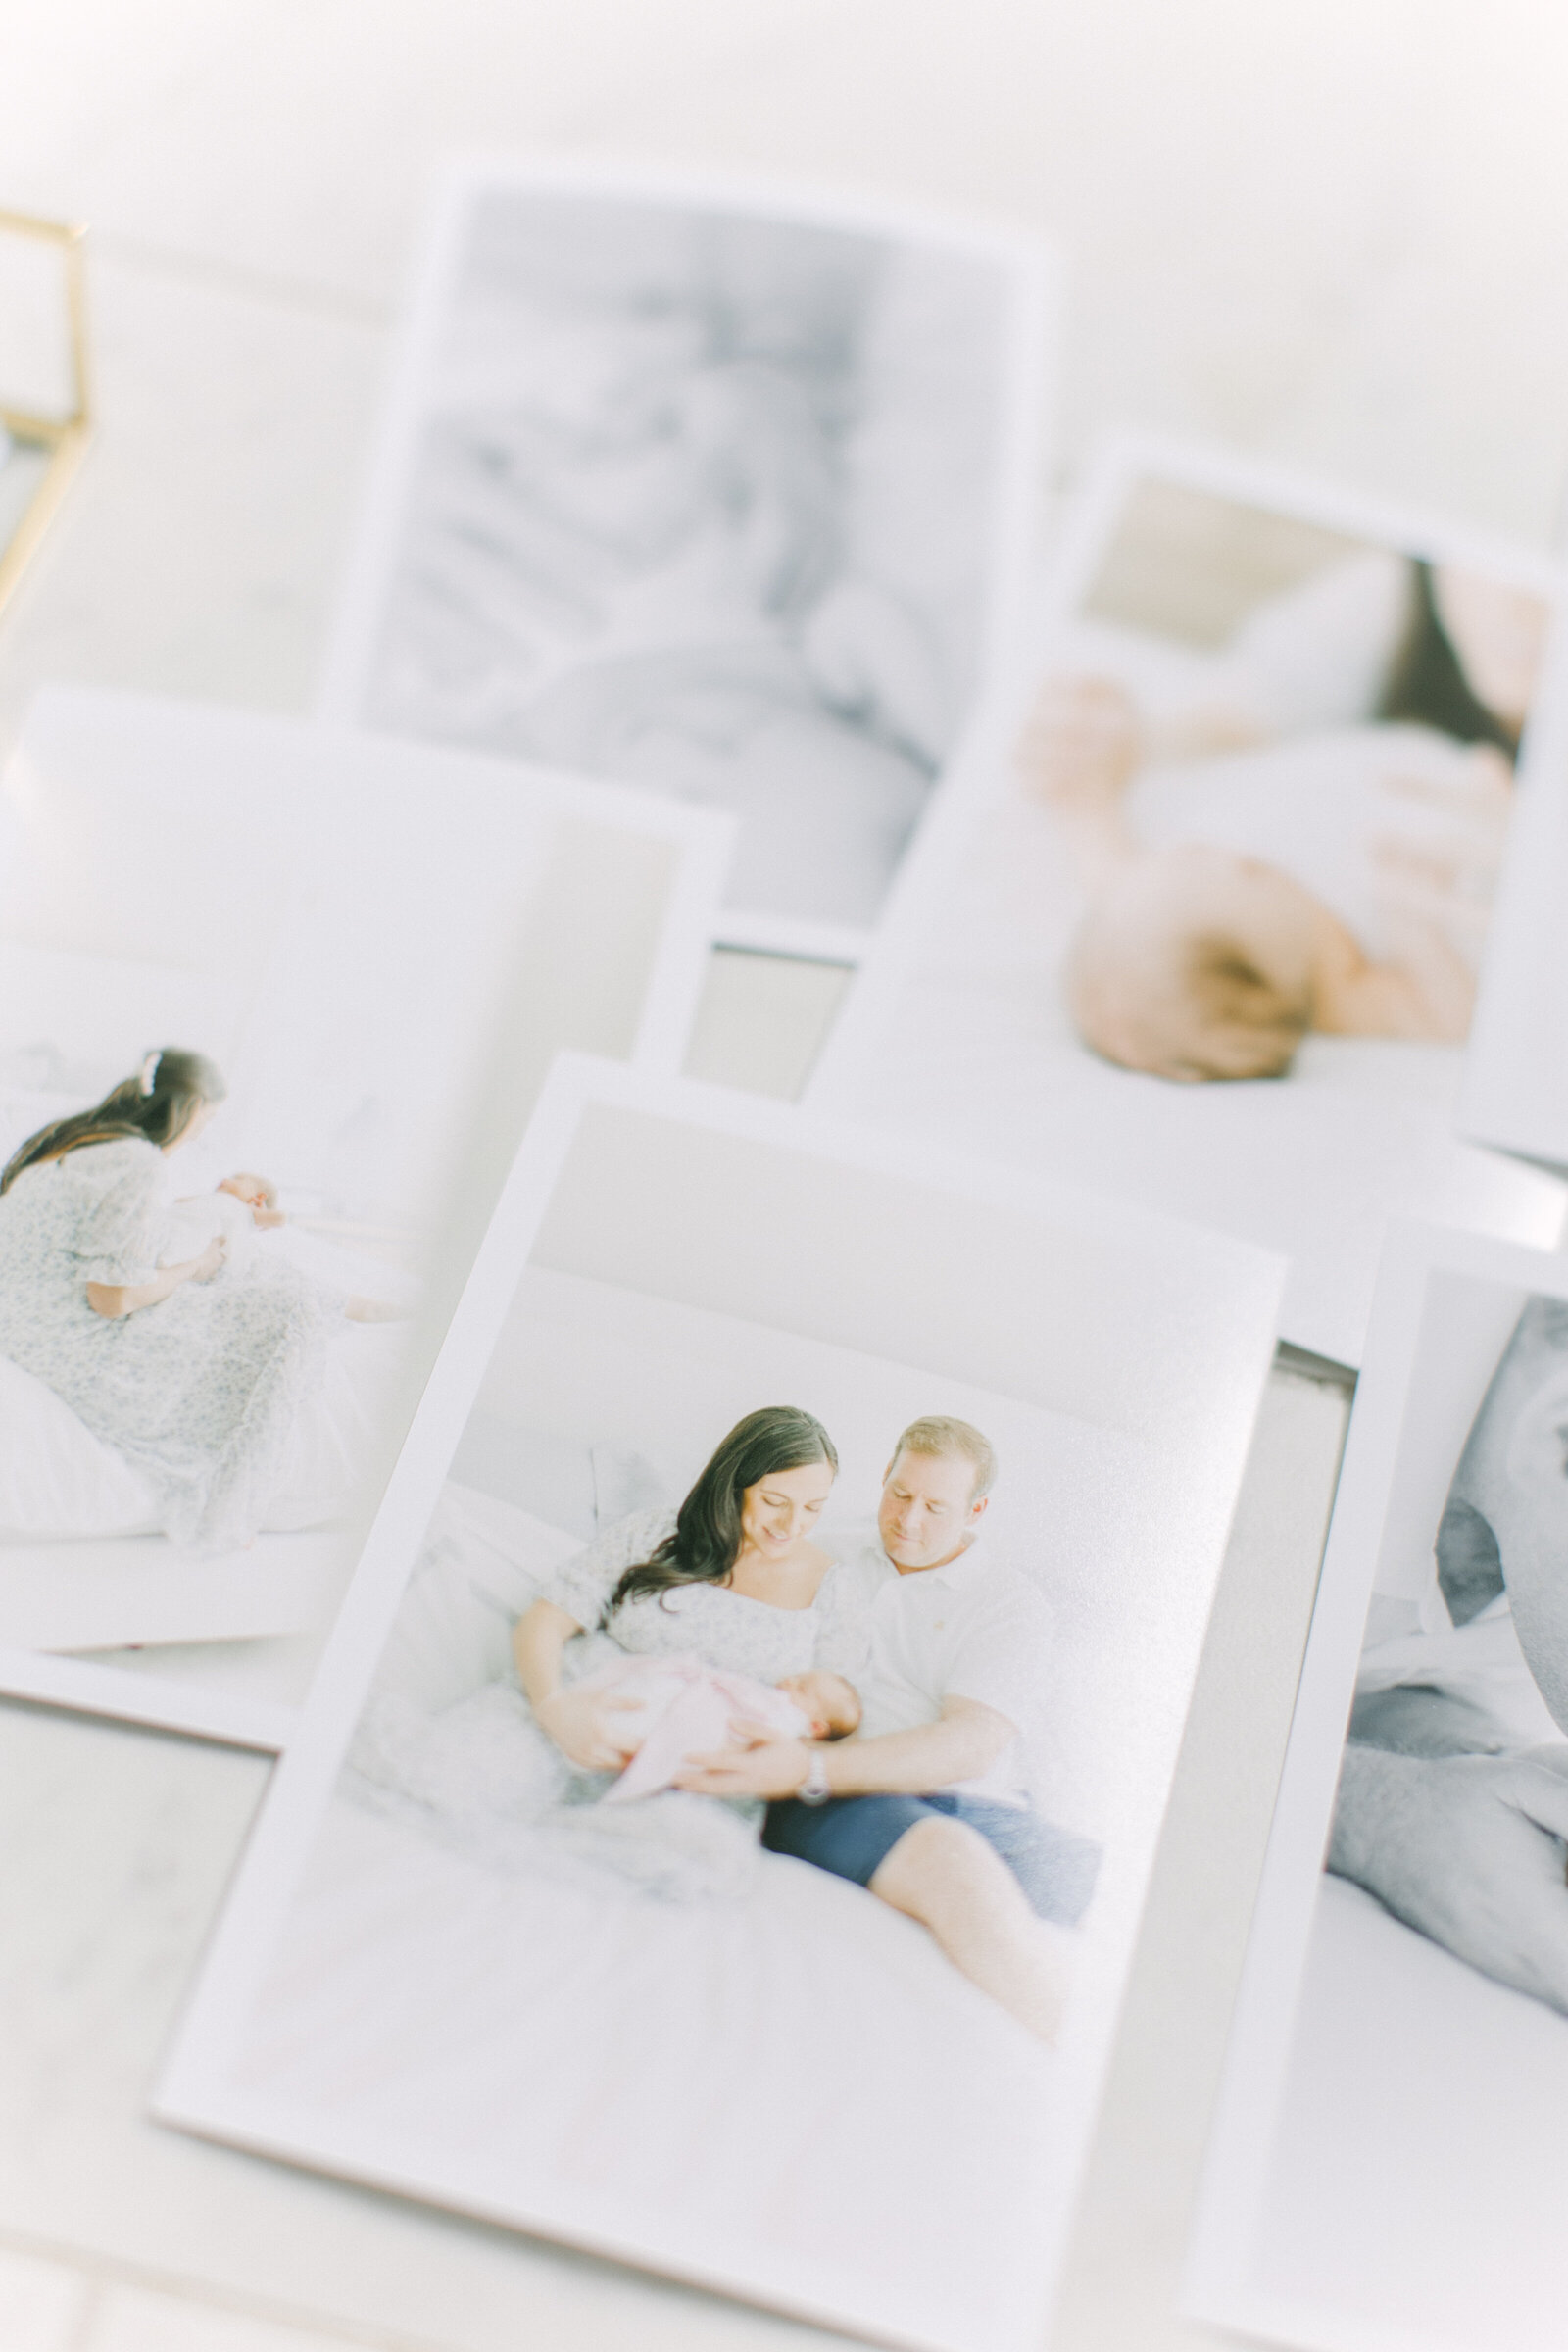 A photo of multiple 4x6 printed photos of a family during their newborn photo session  laid out in a collage